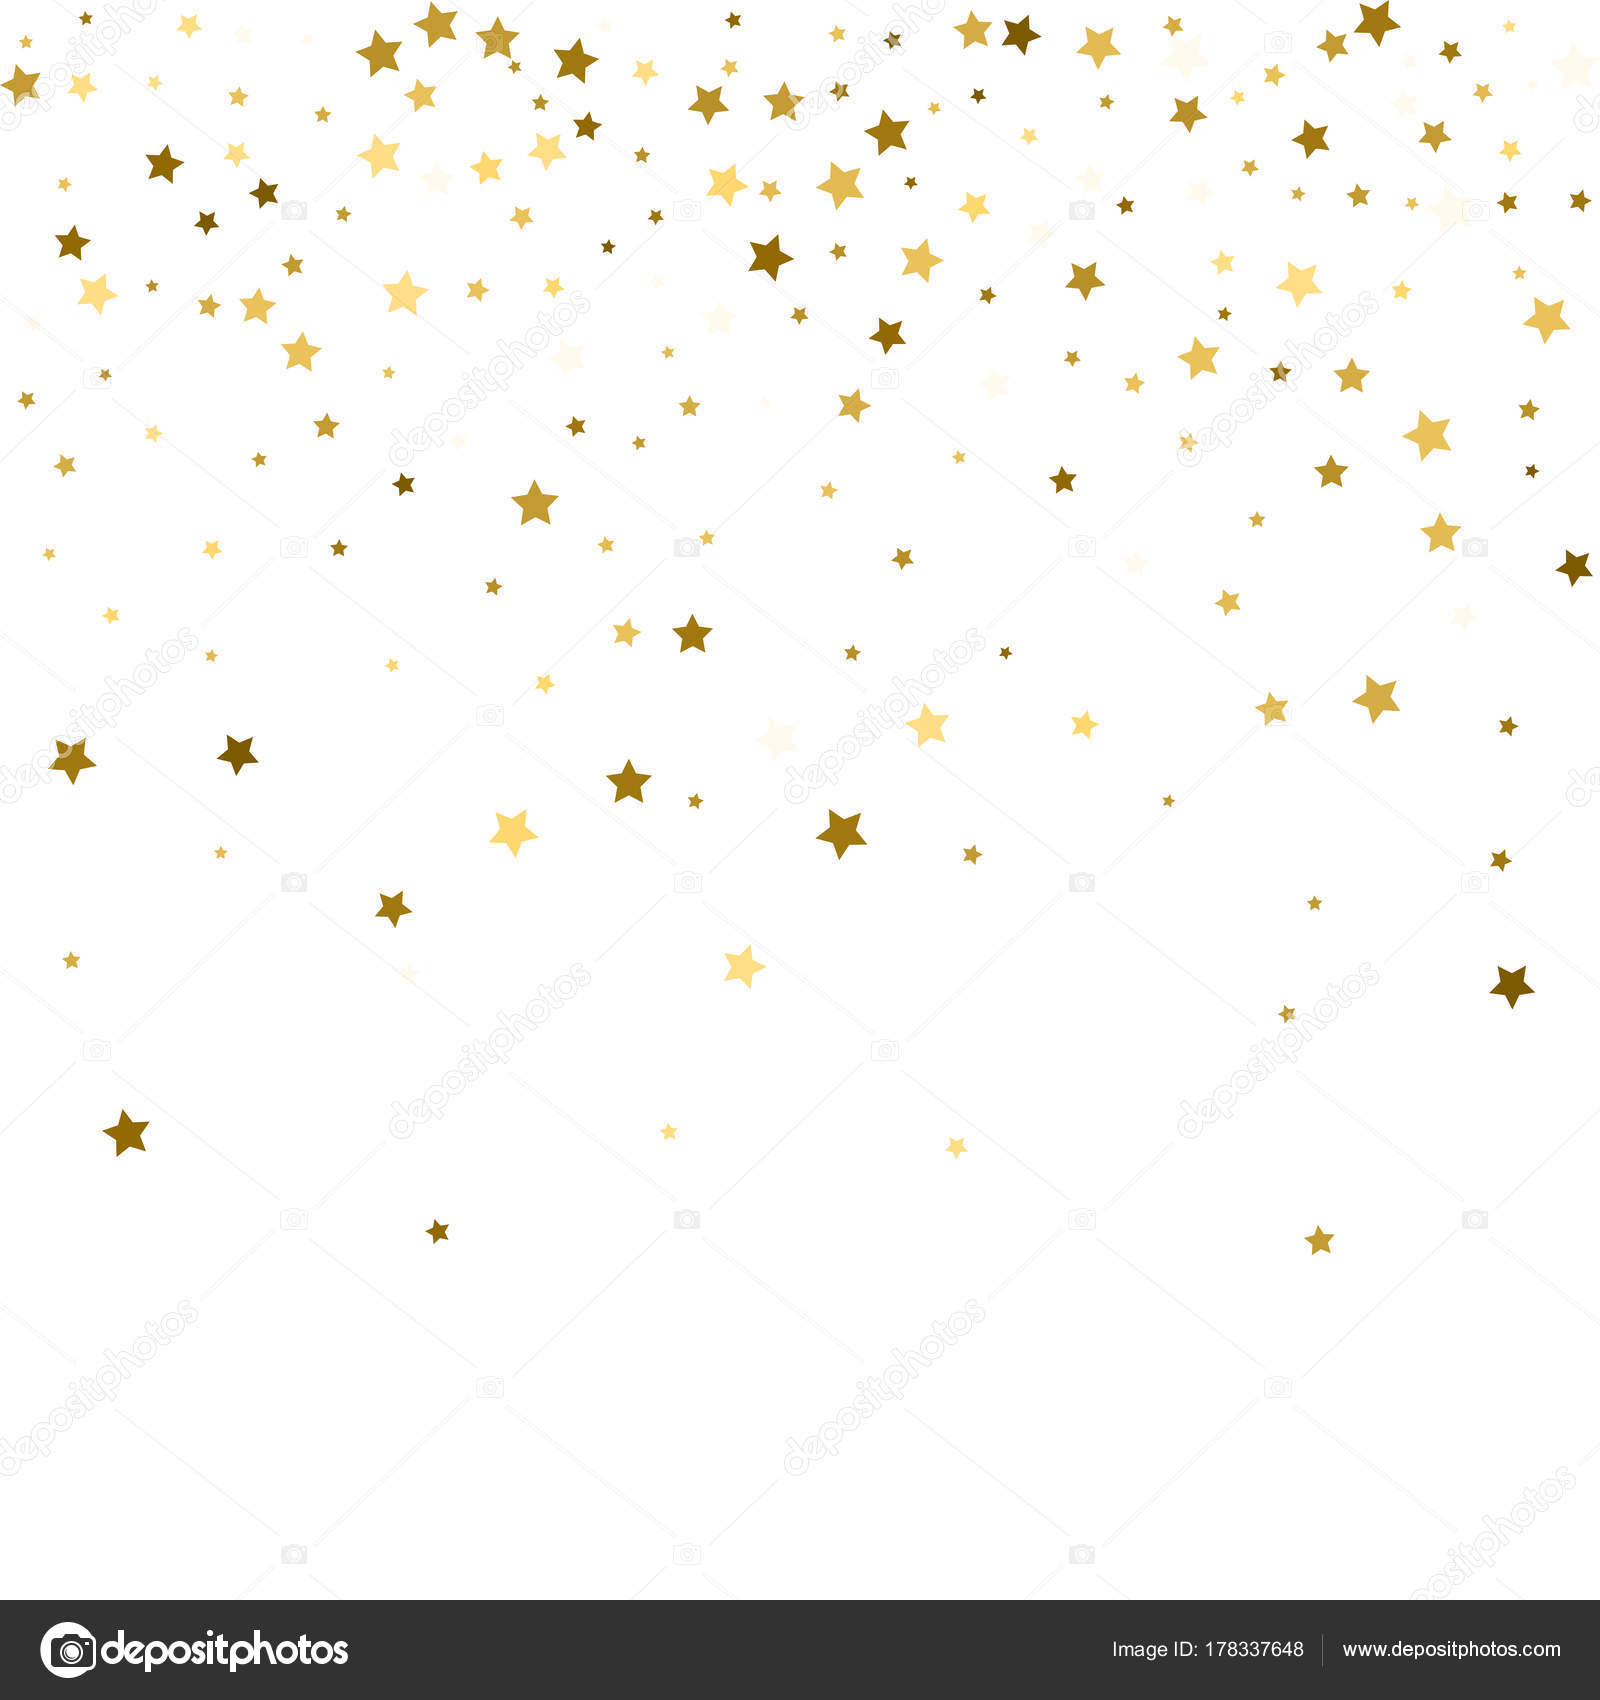 Abstract background with many falling gold stars Vector Image